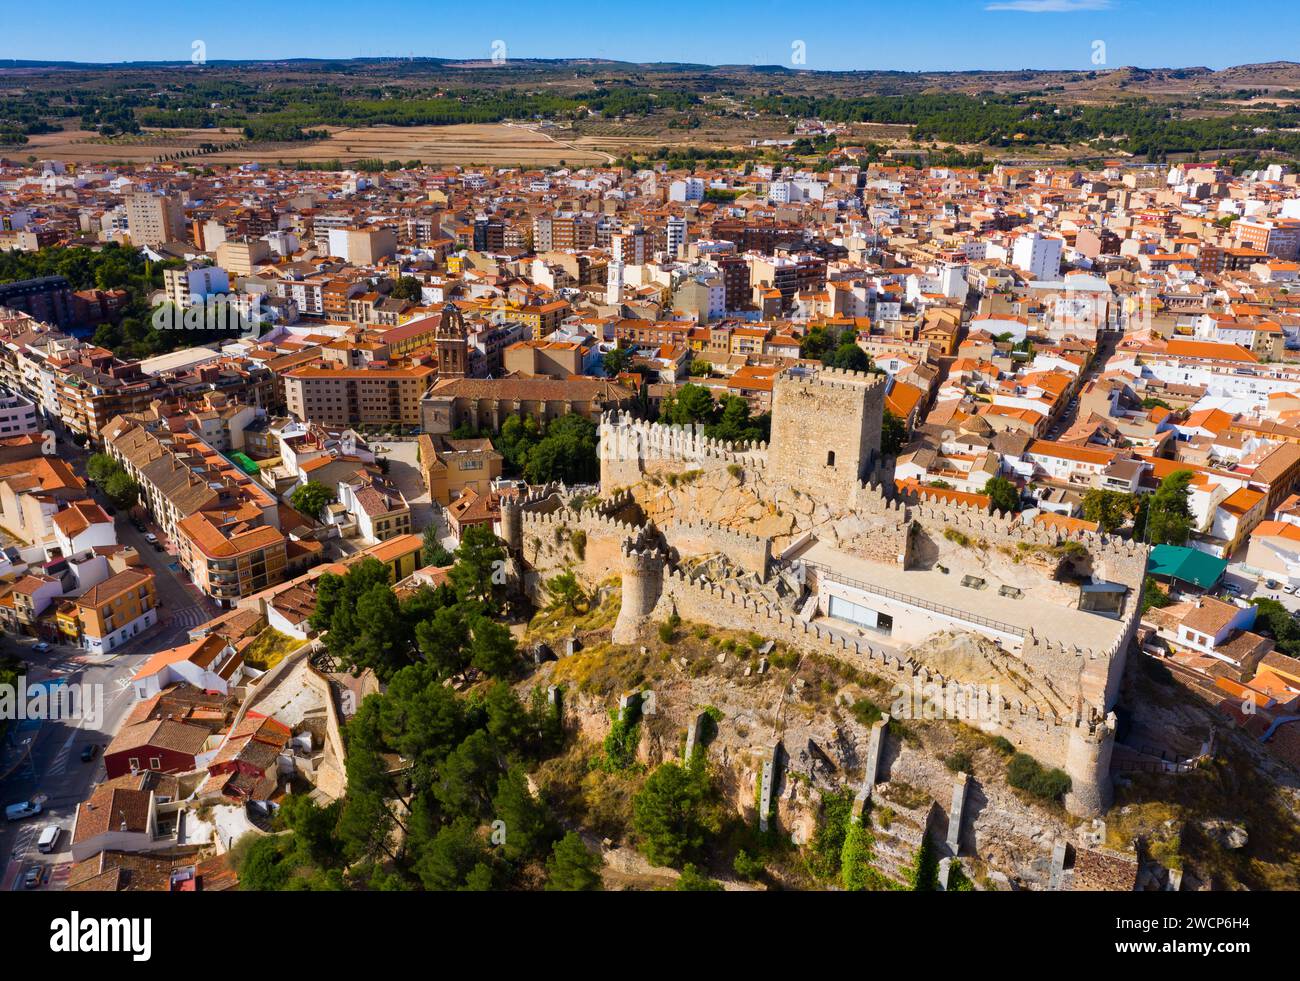 View from drone of Almansa overlooking fortified Castle and Church, Spain Stock Photo